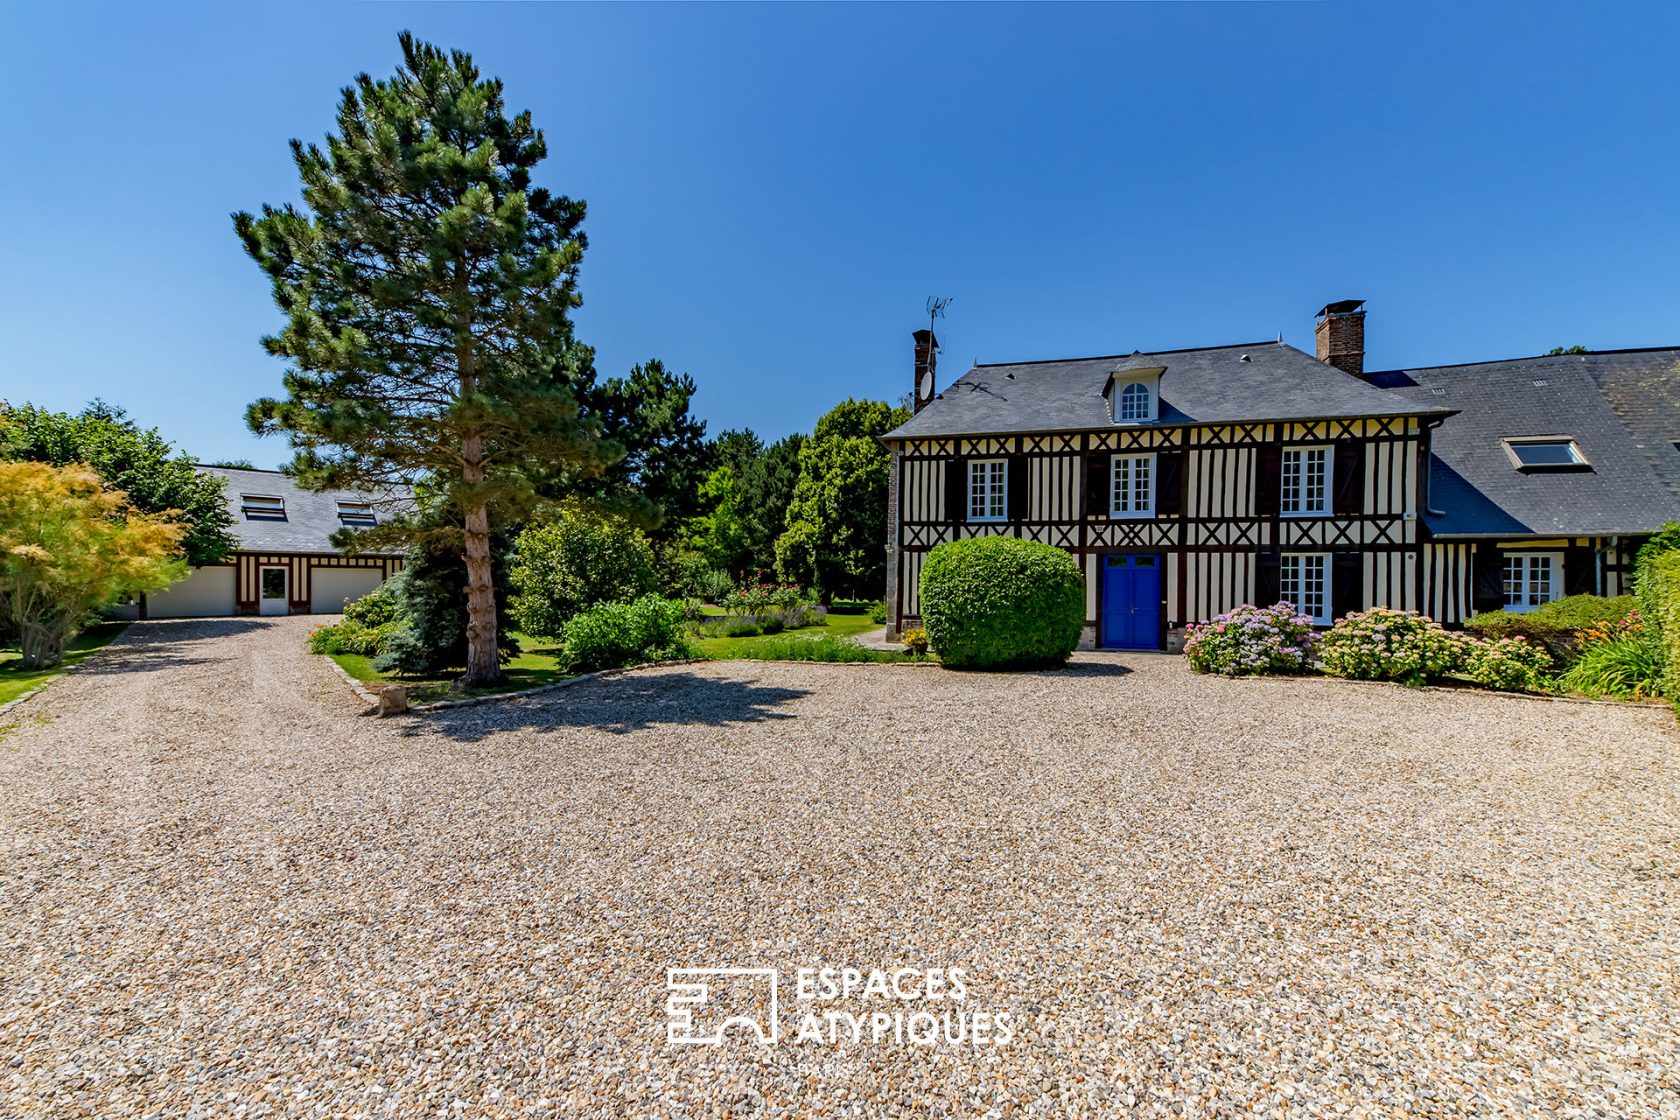 Traditional property renovated near the Normandy coast